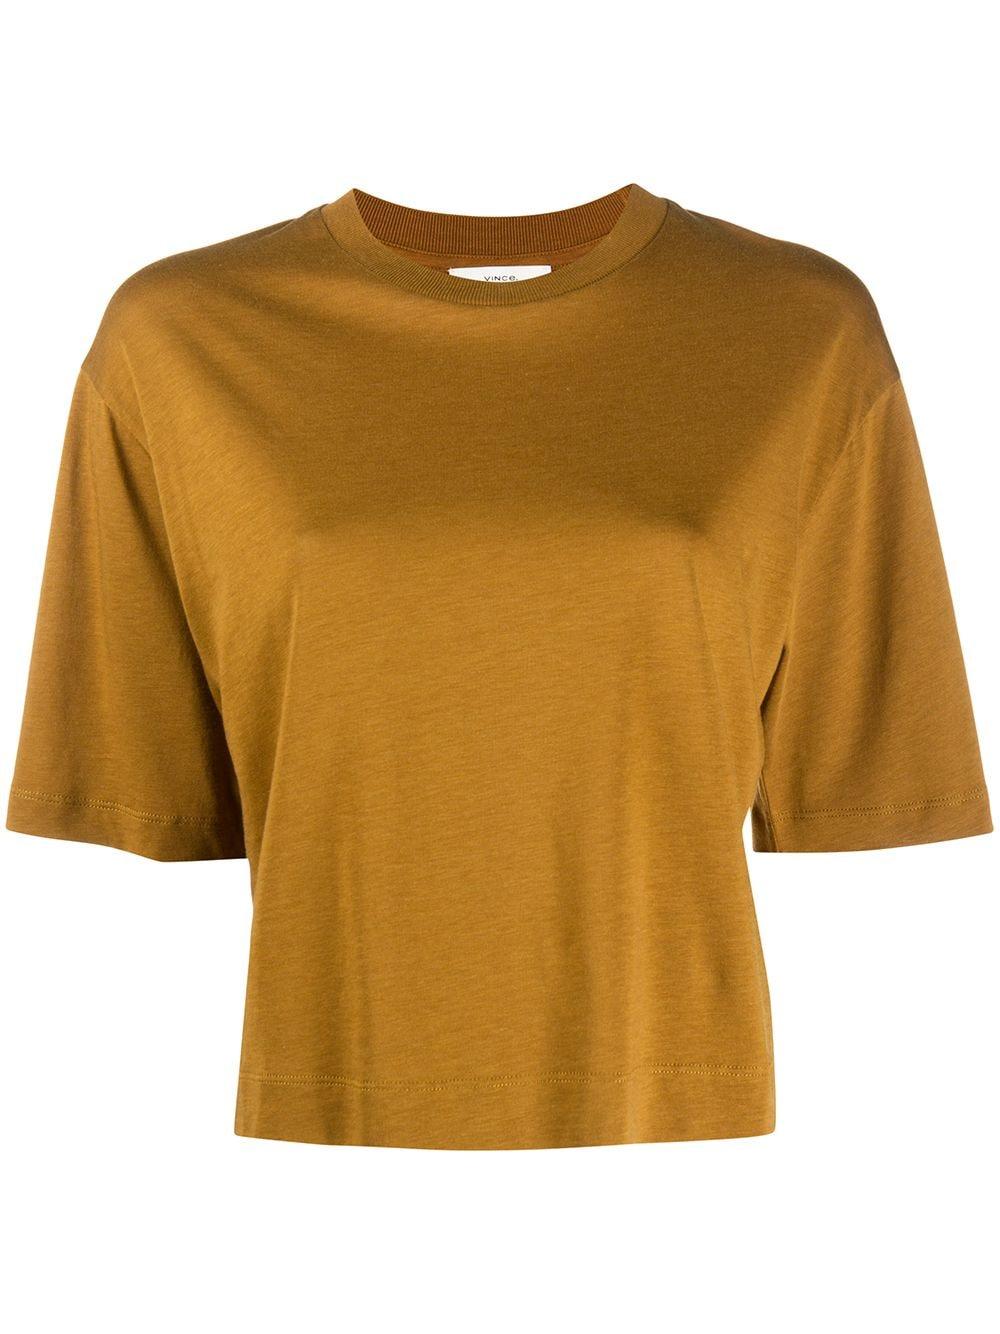 Vince Cotton Cropped Wide Sleeve T-shirt in Brown - Lyst